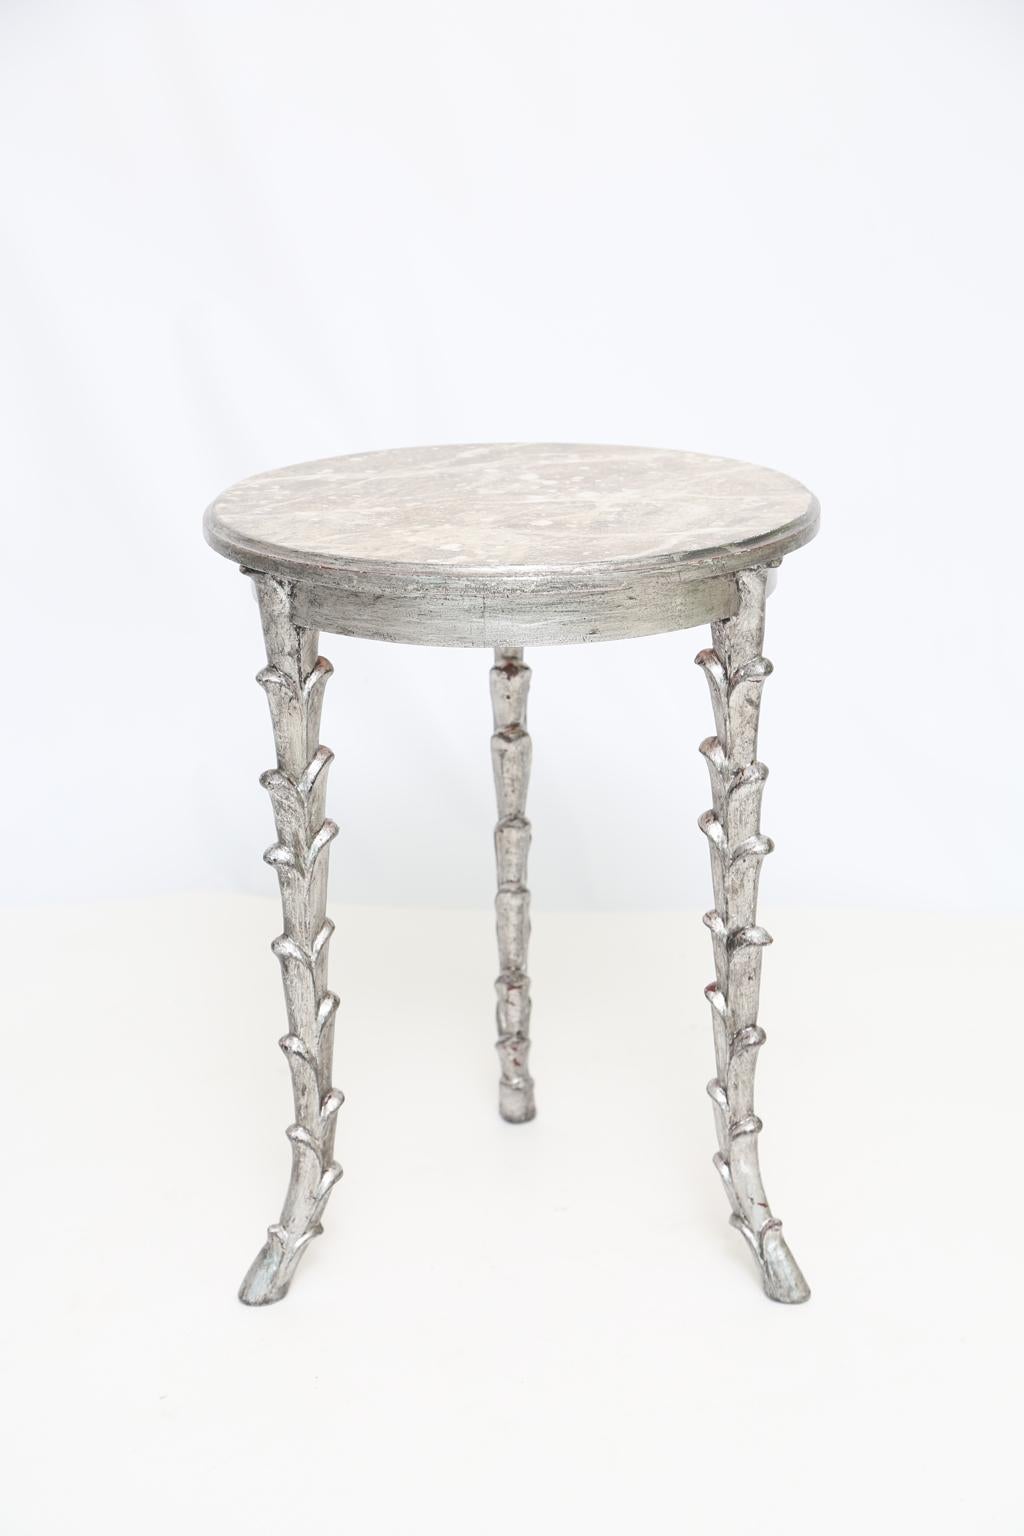 Silvergilt Accent Table with Foliate Legs In Good Condition For Sale In West Palm Beach, FL